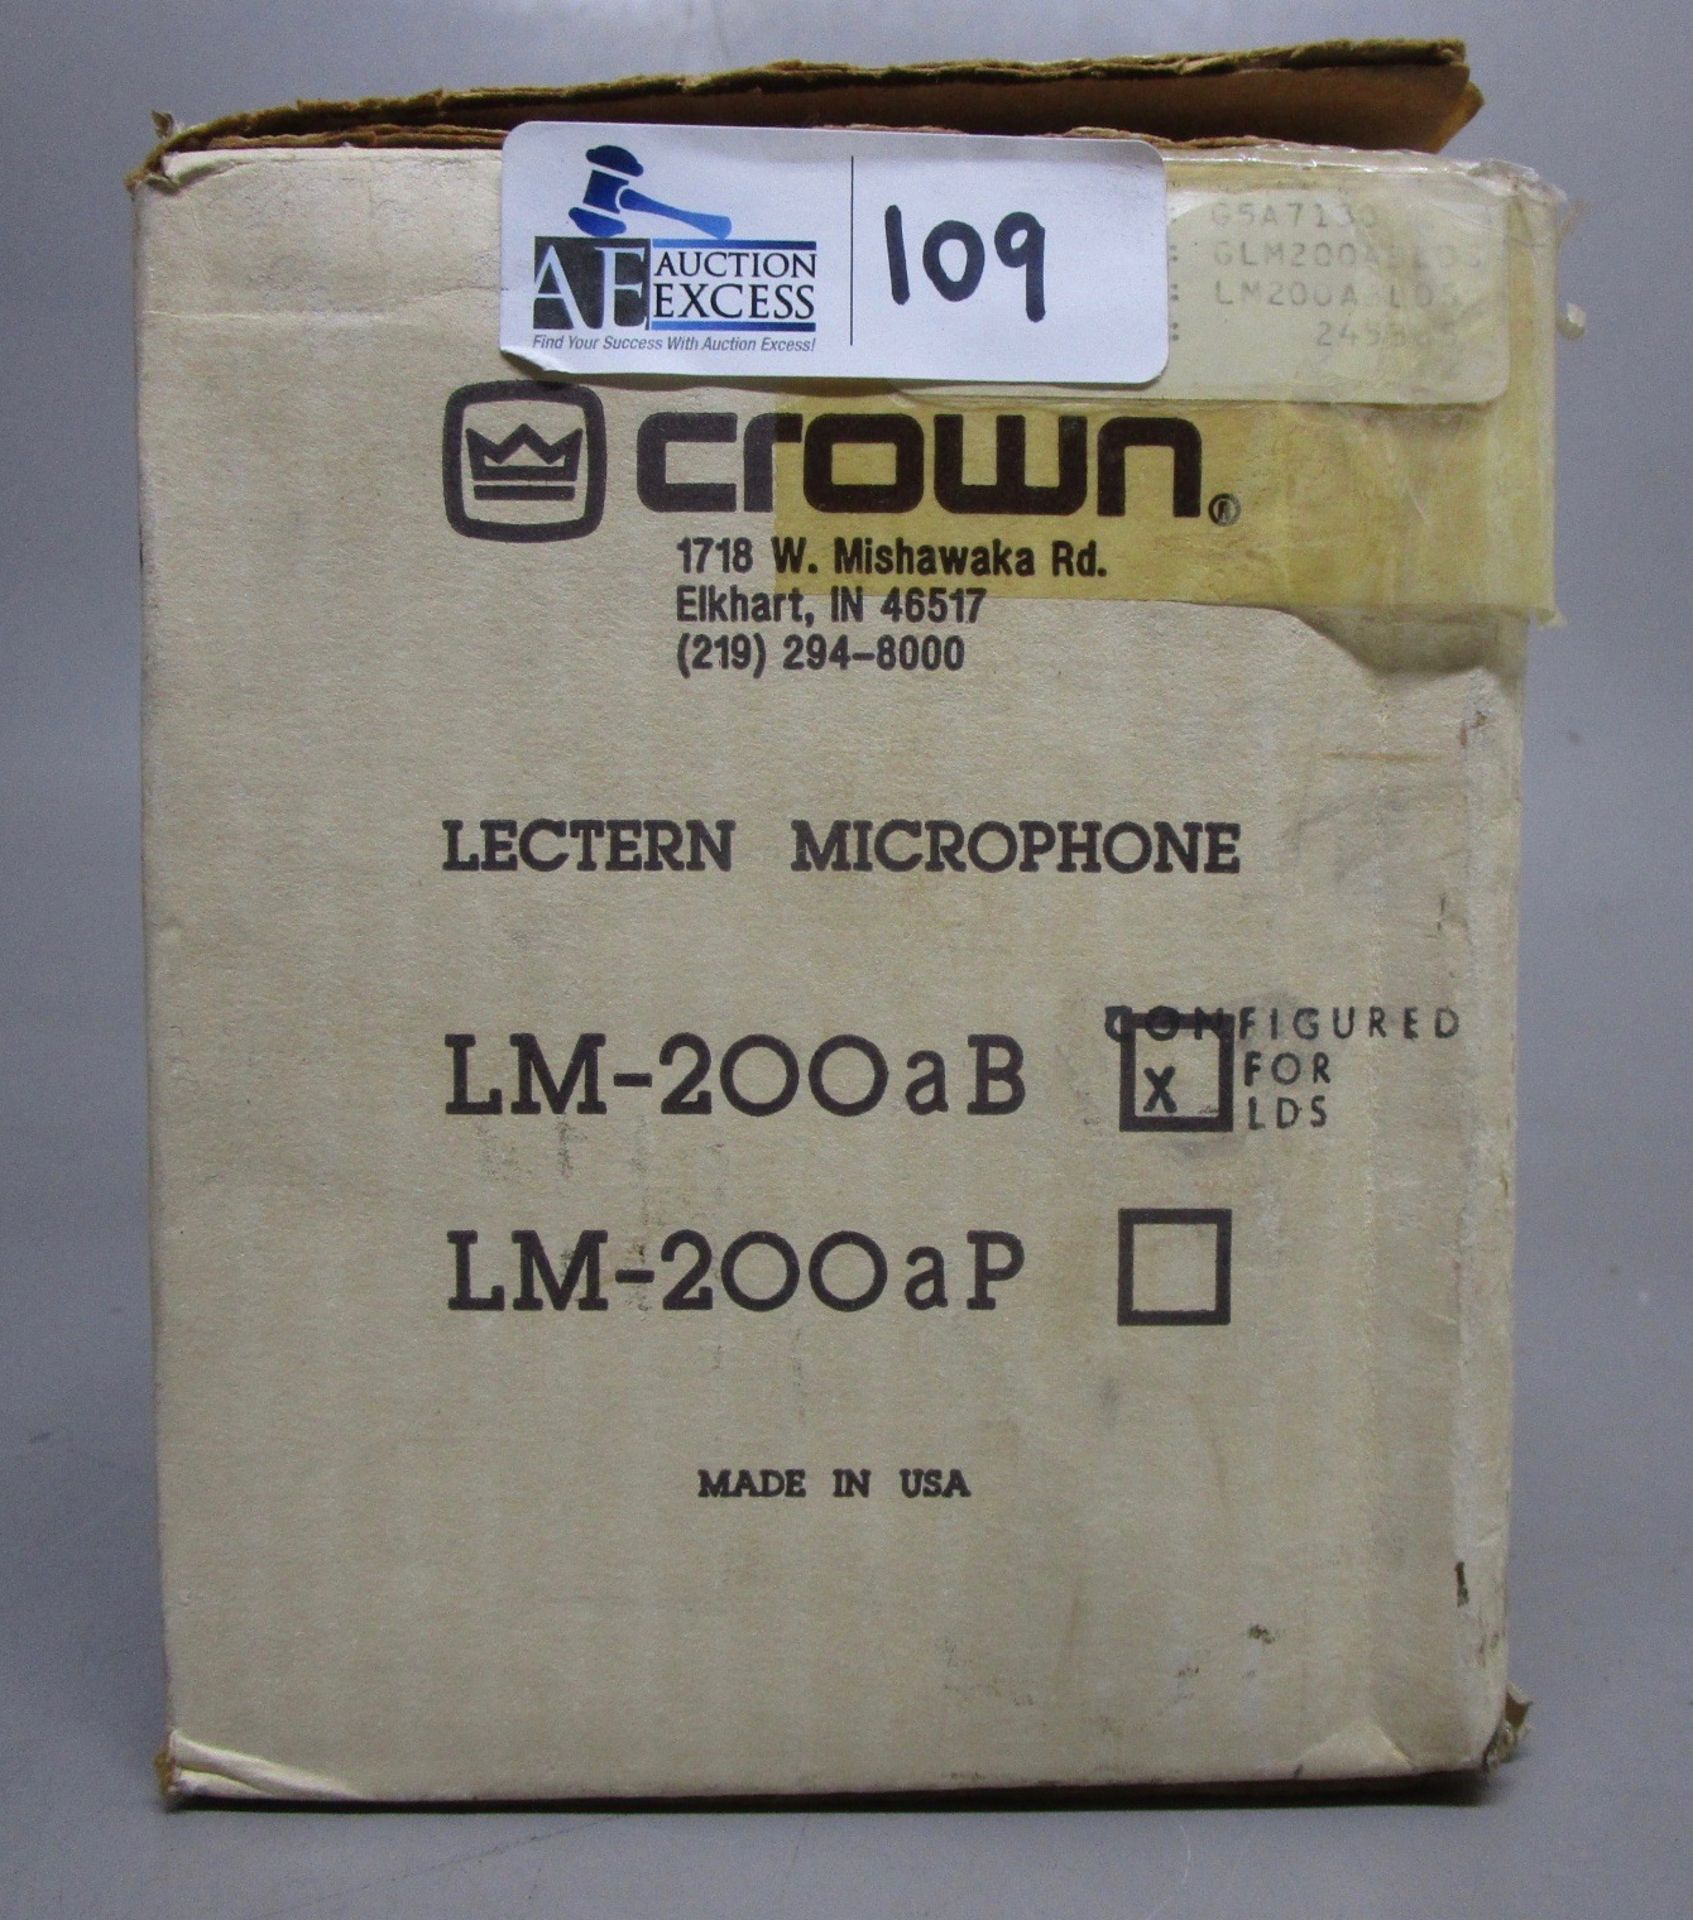 CROWN LM 200 AB LECTURN MIC IN ORIGINAL BOX - Image 3 of 3